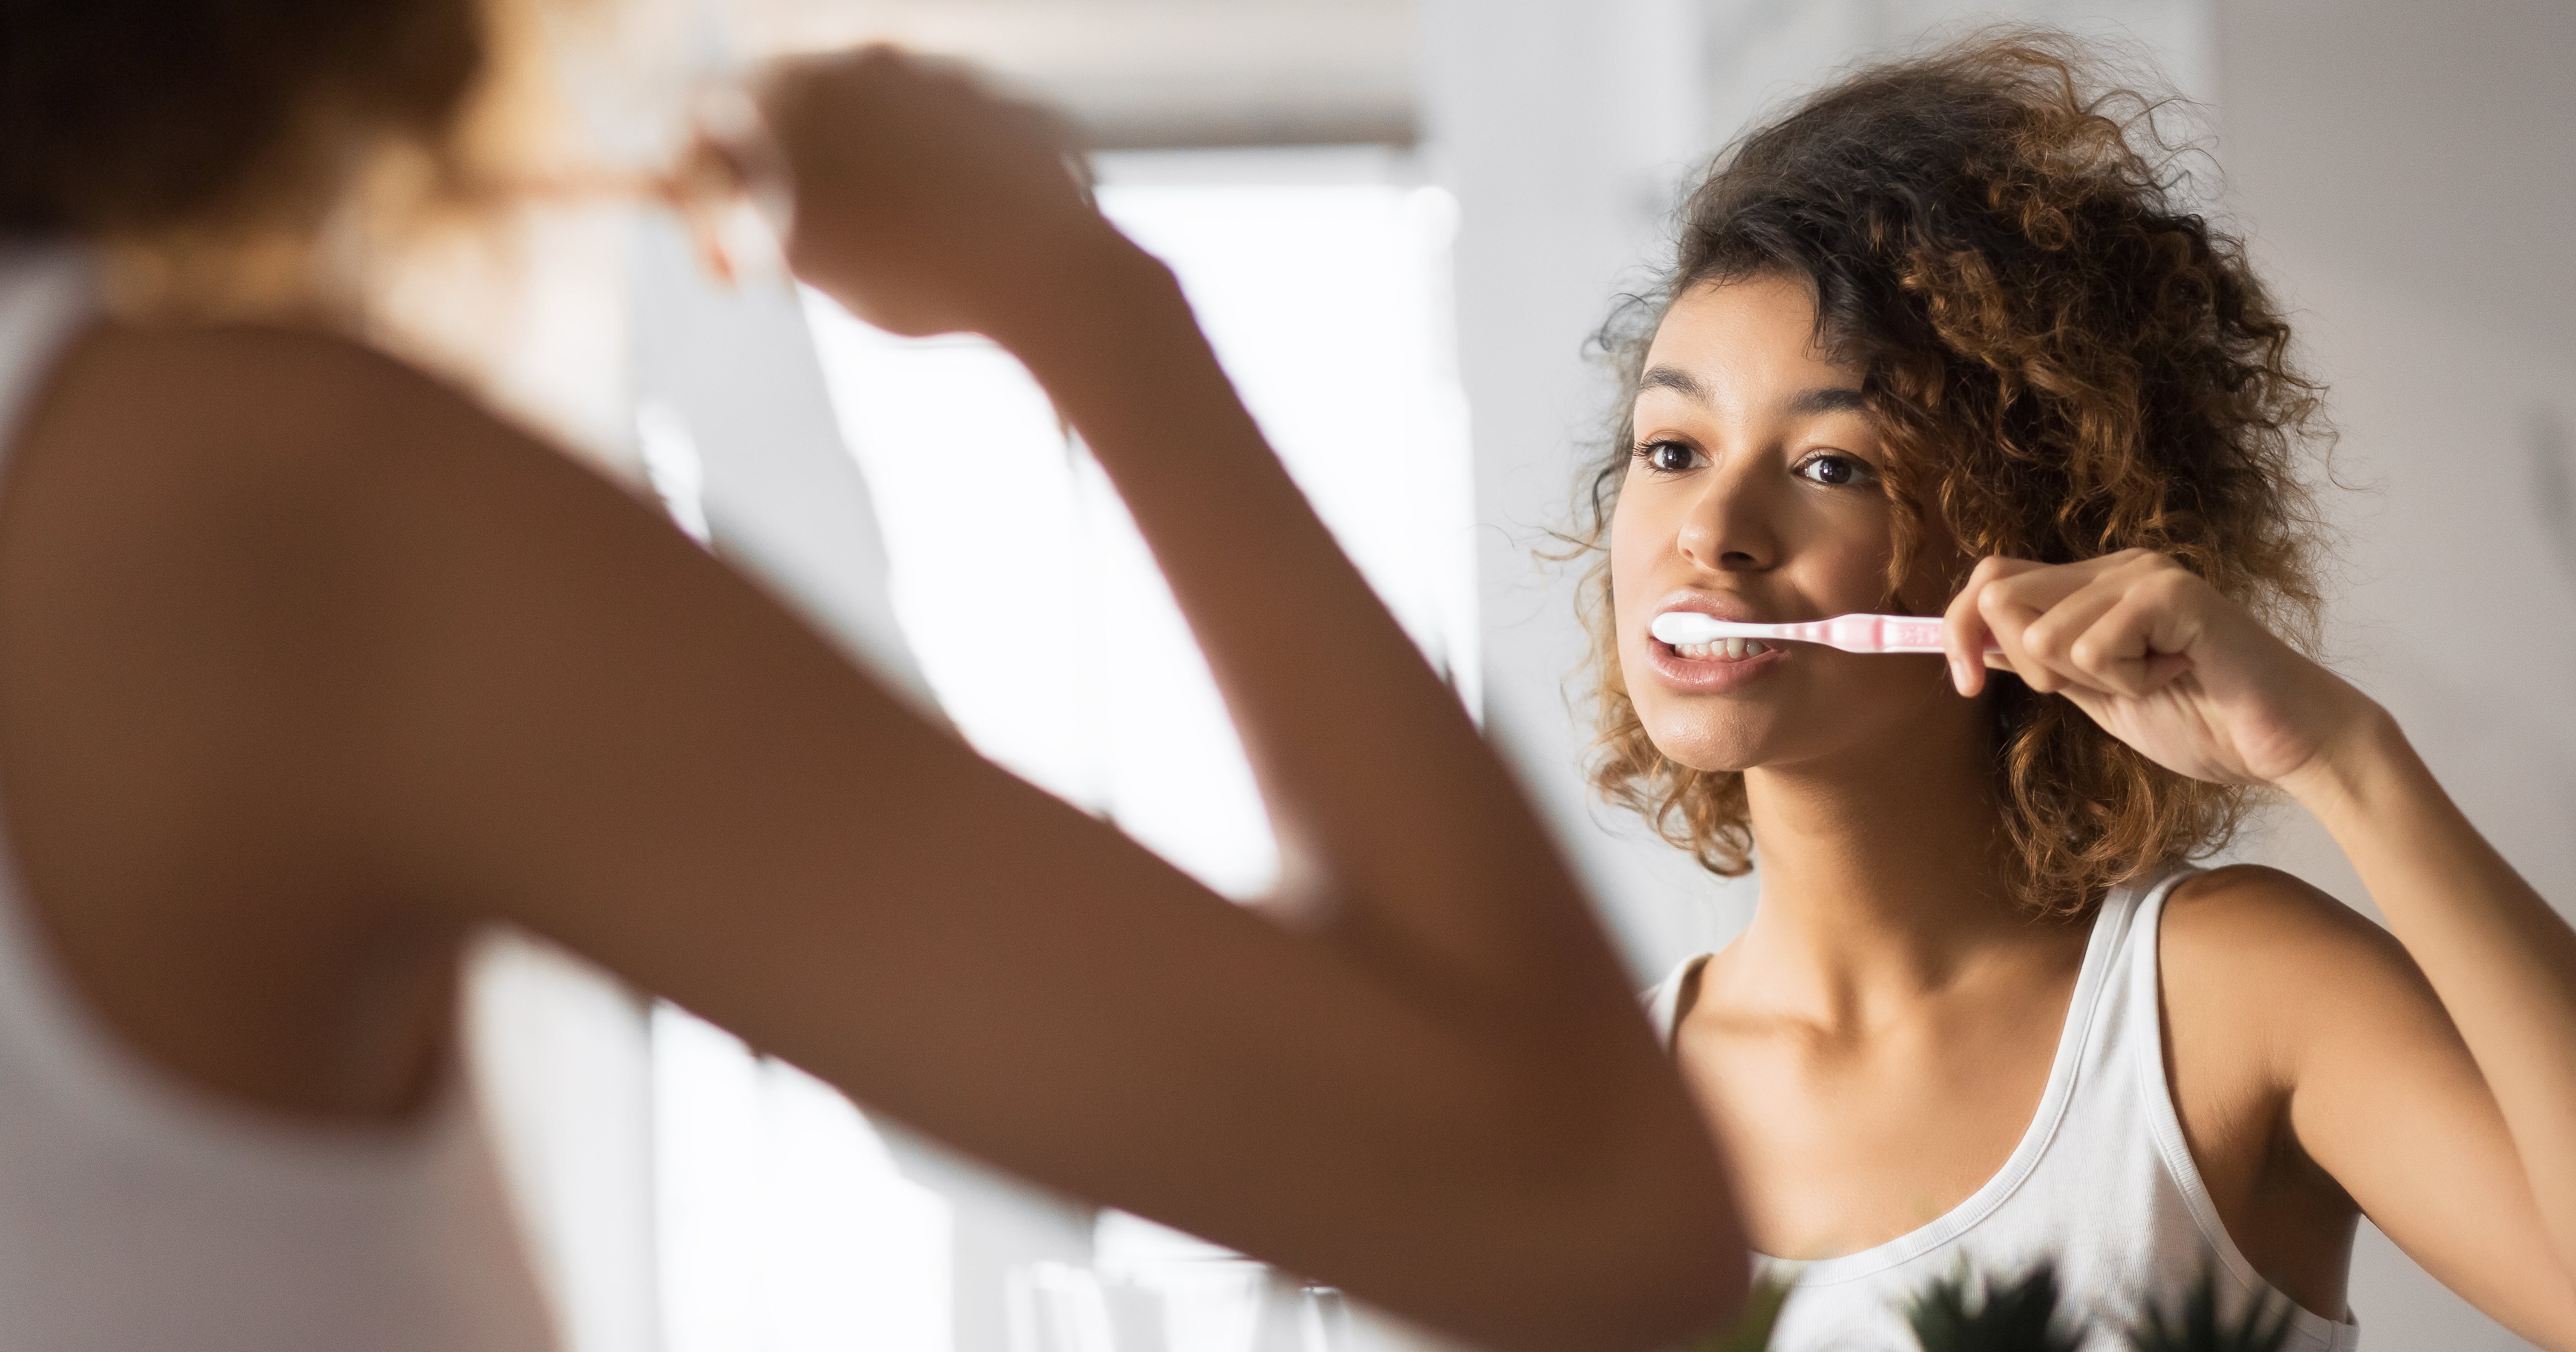 16 Oral-Care Products That’ll Level Up Your Daily Routine